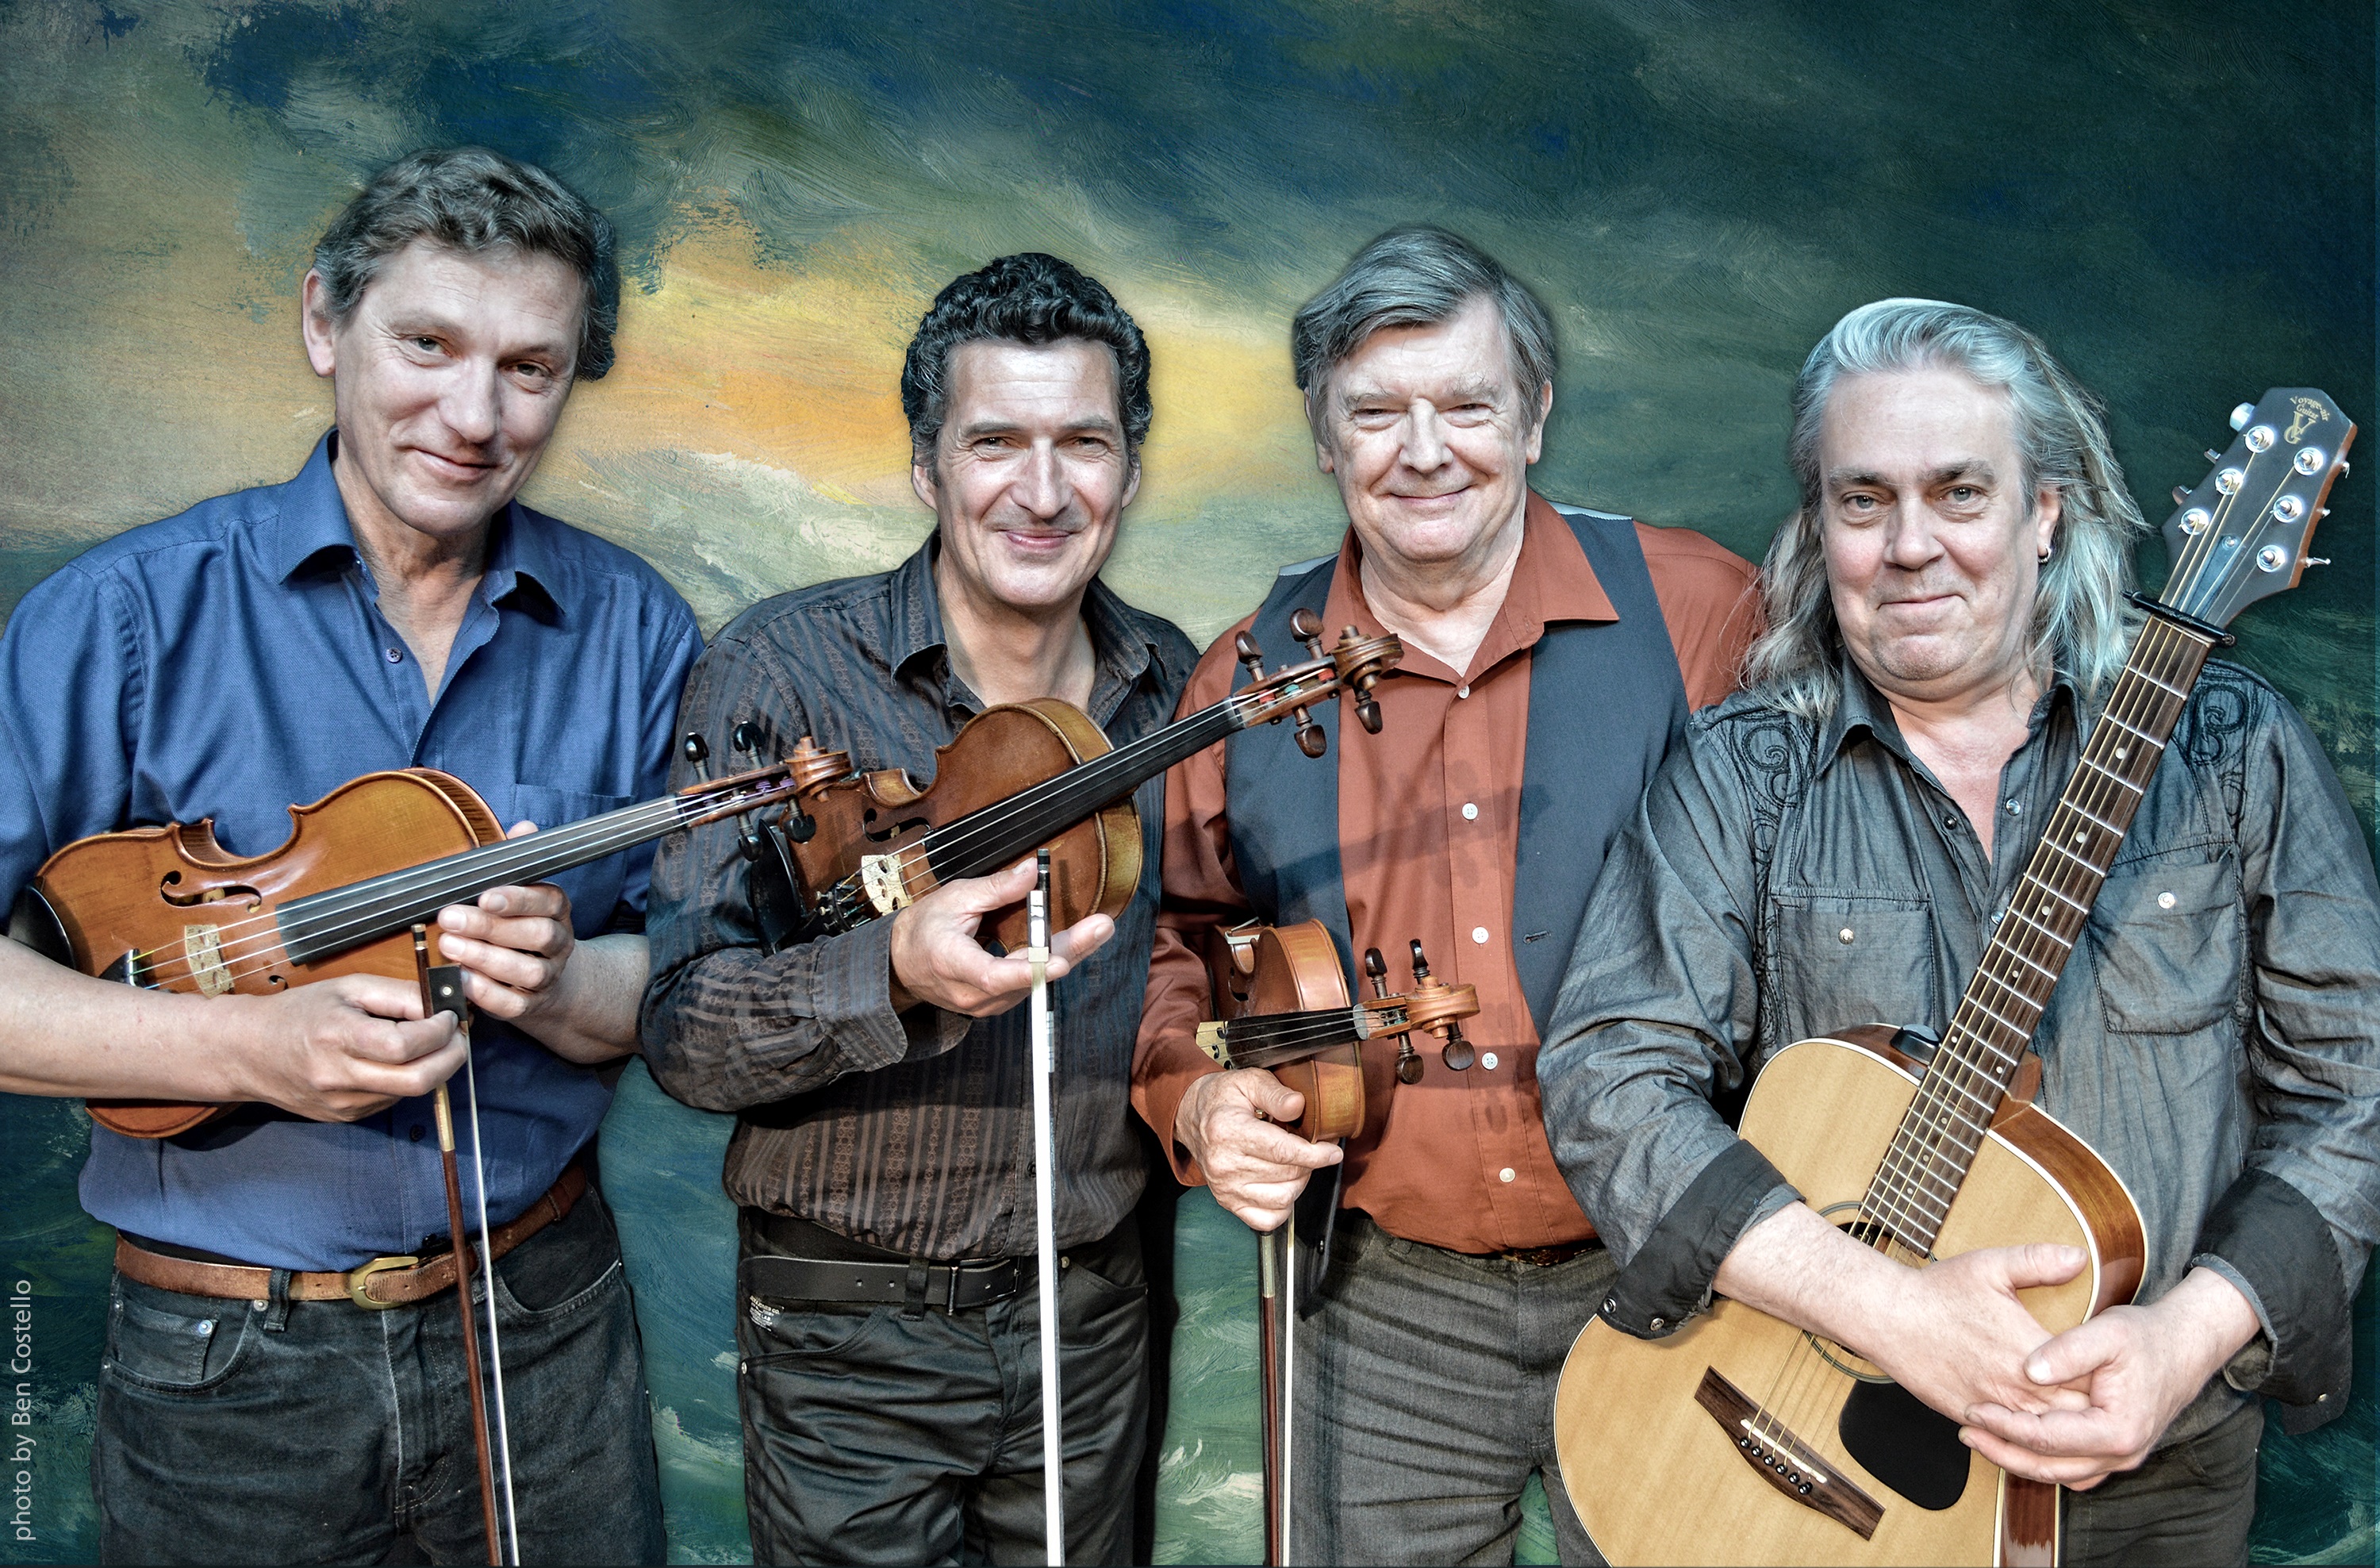 Celtic fiddle festival at The Brindley 🗓